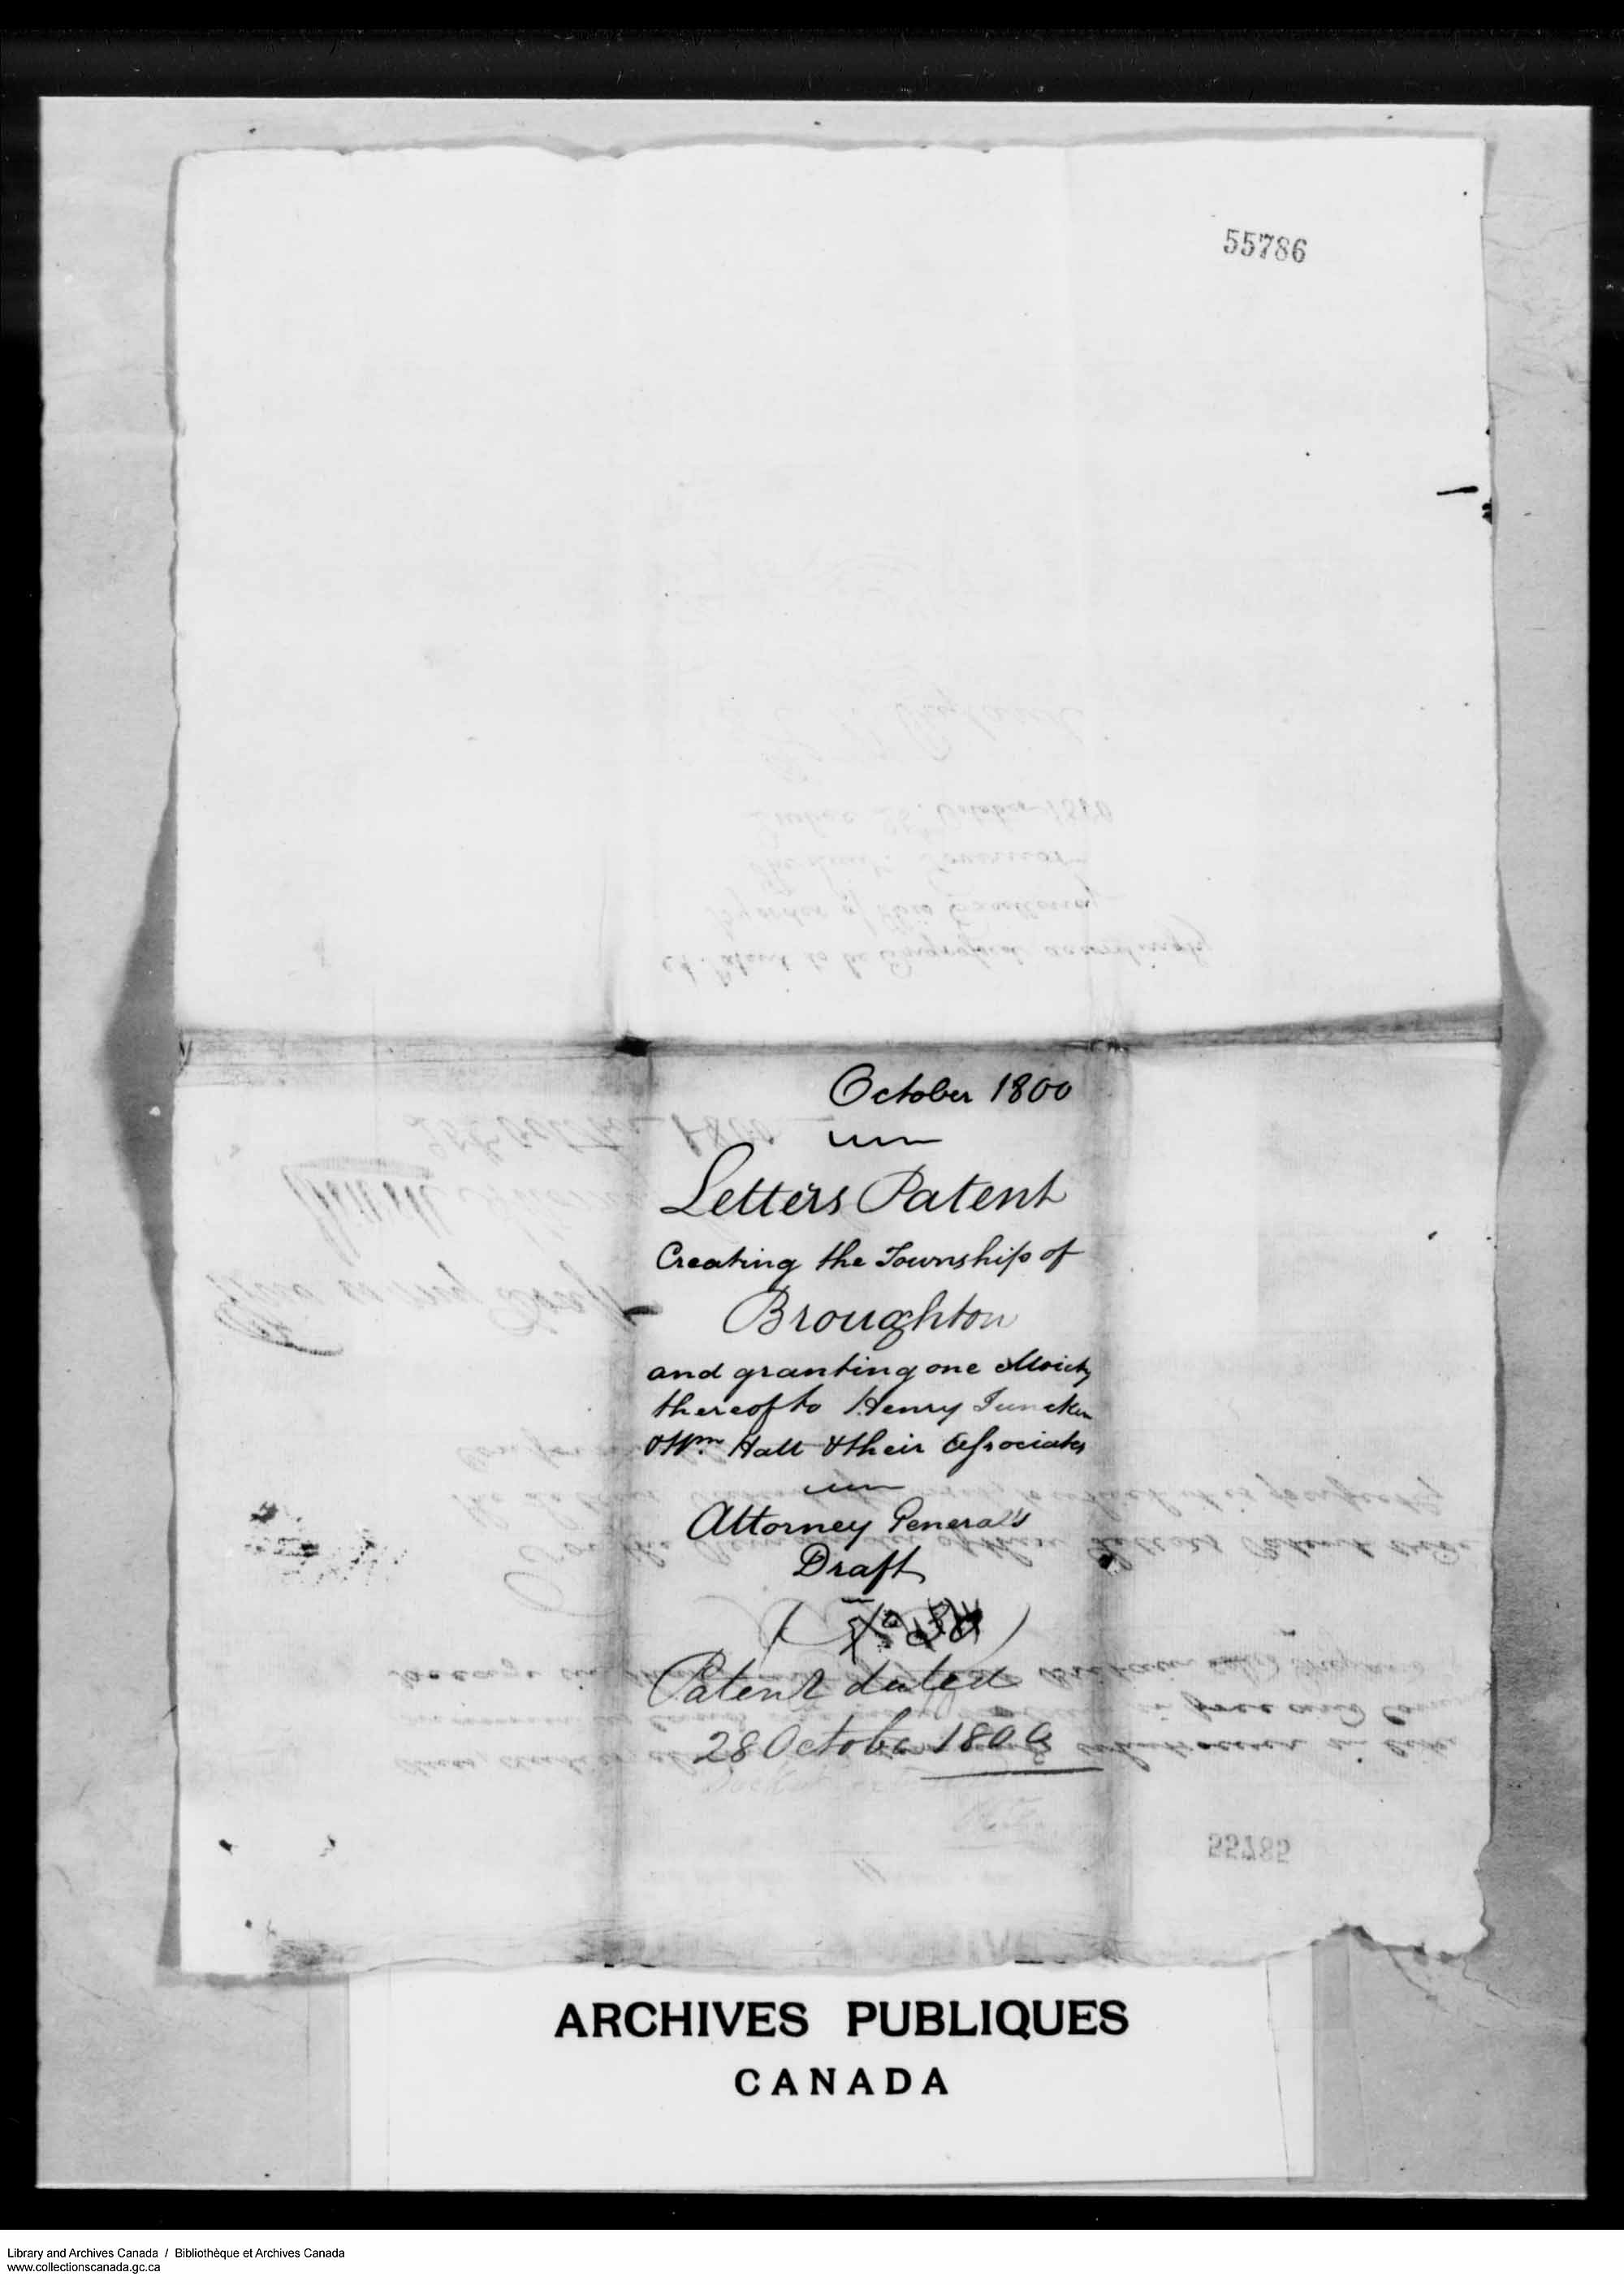 Digitized page of  for Image No.: e008700274